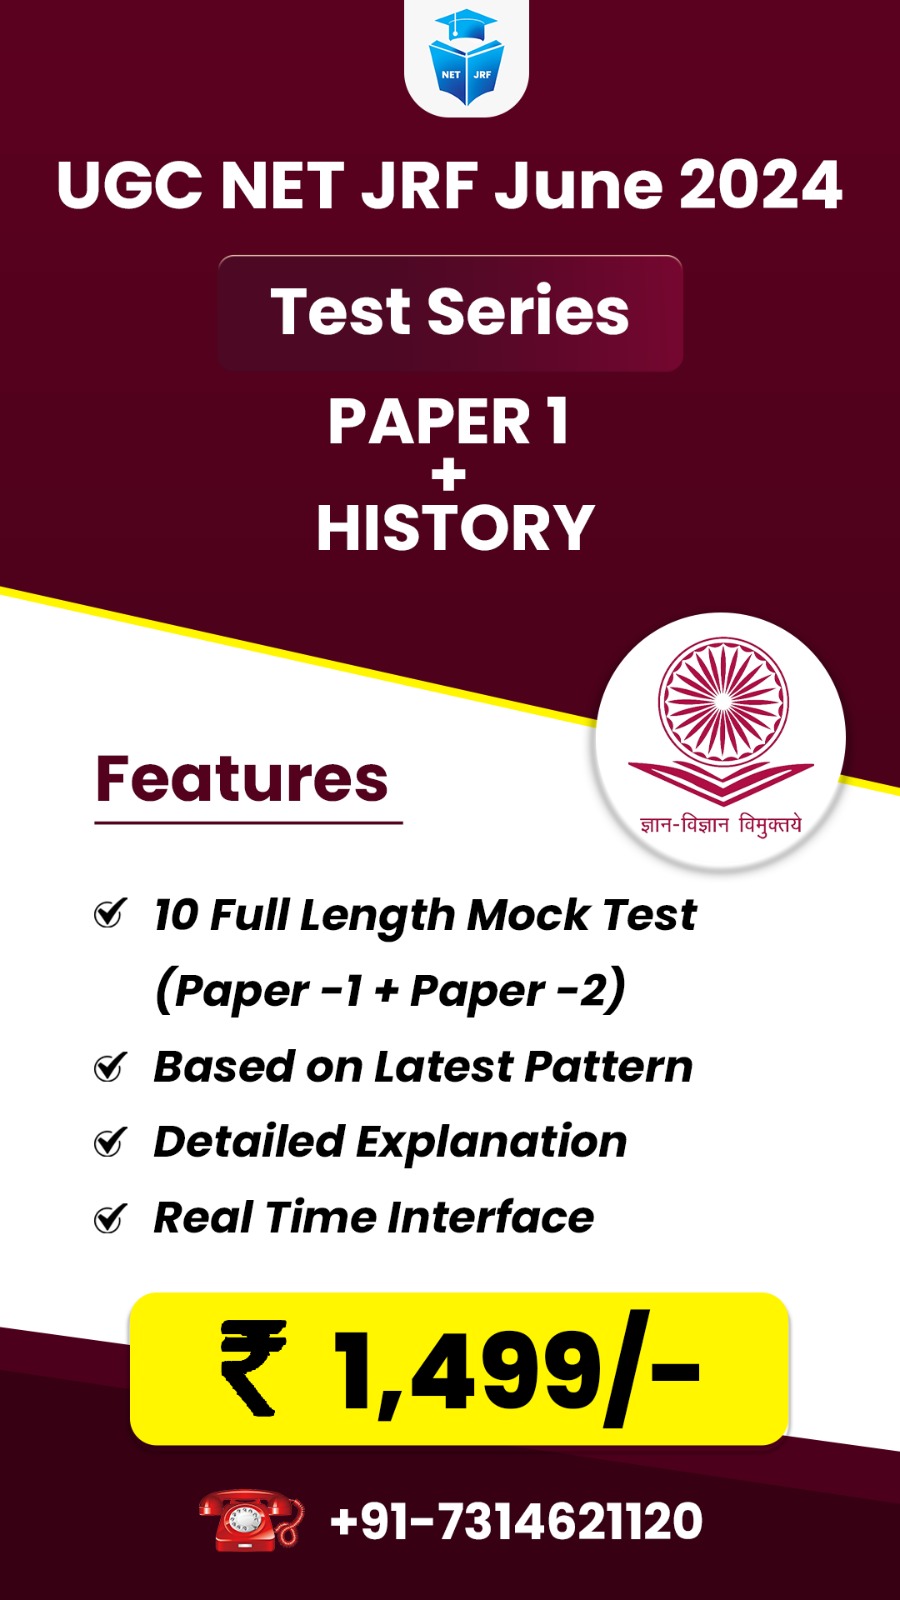 History (Paper 1 + Paper 2) Test Series for June 2024